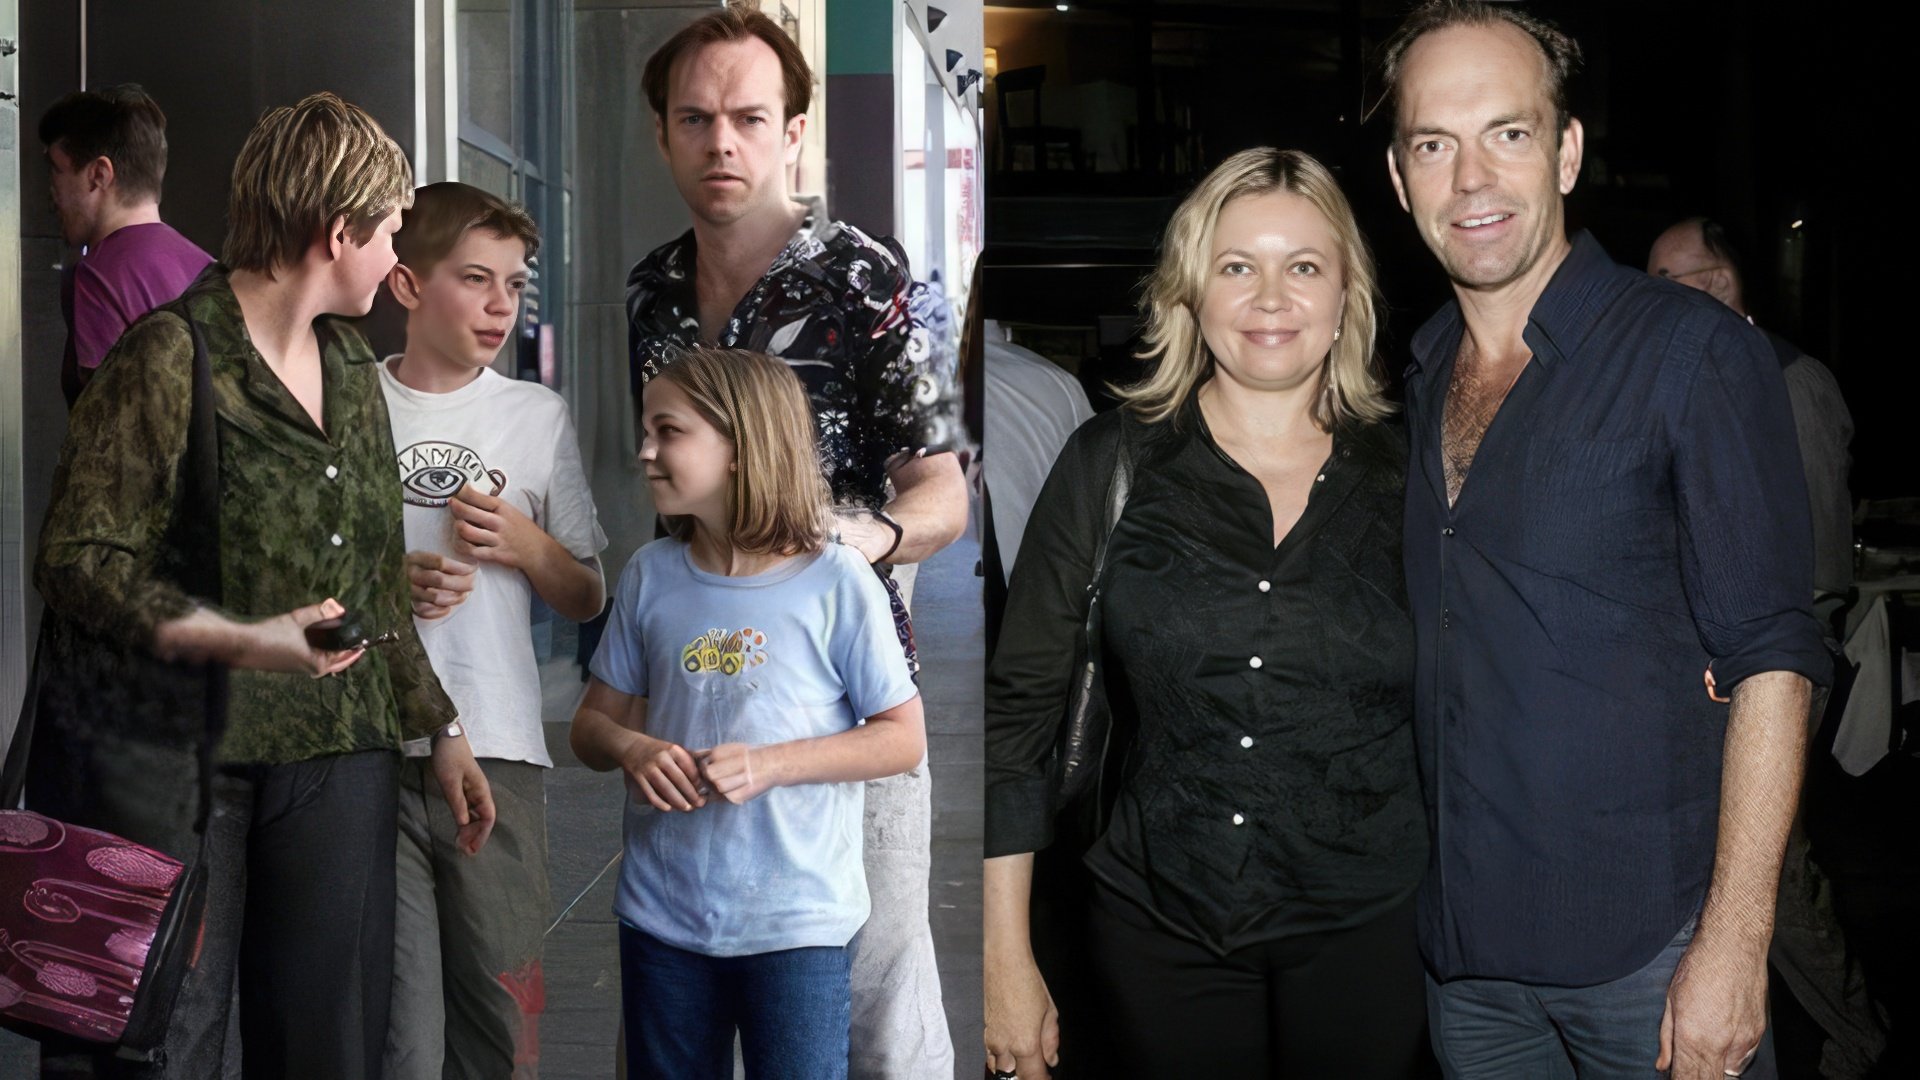 Hugo Weaving with his wife and children